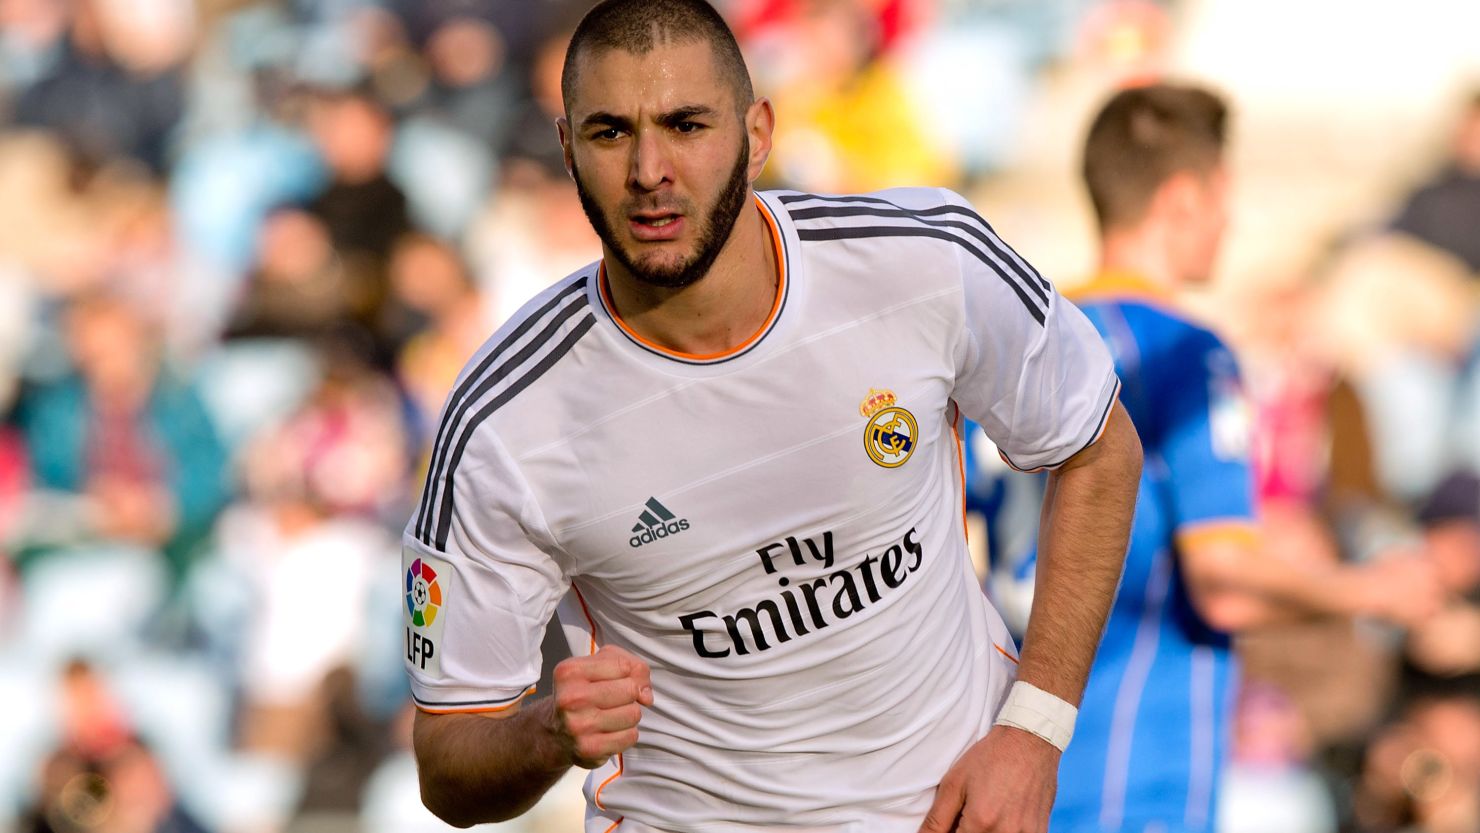 Karim Benzema was on the scoresheet for Real Madrid in a comfortable away victory at Getafe.